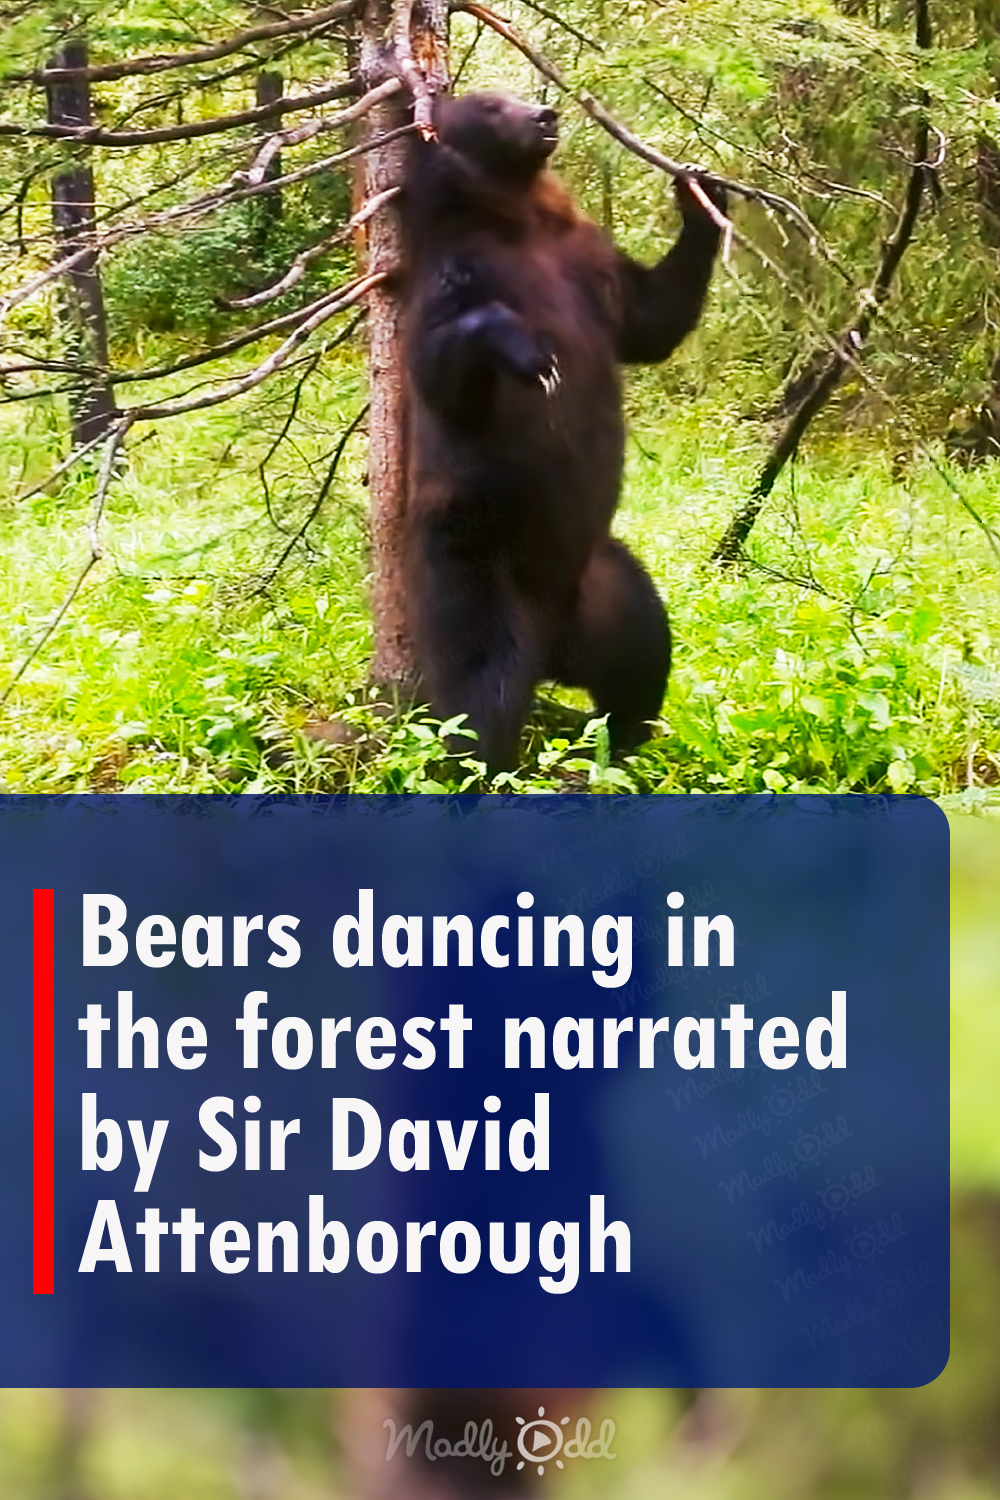 Bears dancing in the forest narrated by Sir David Attenborough